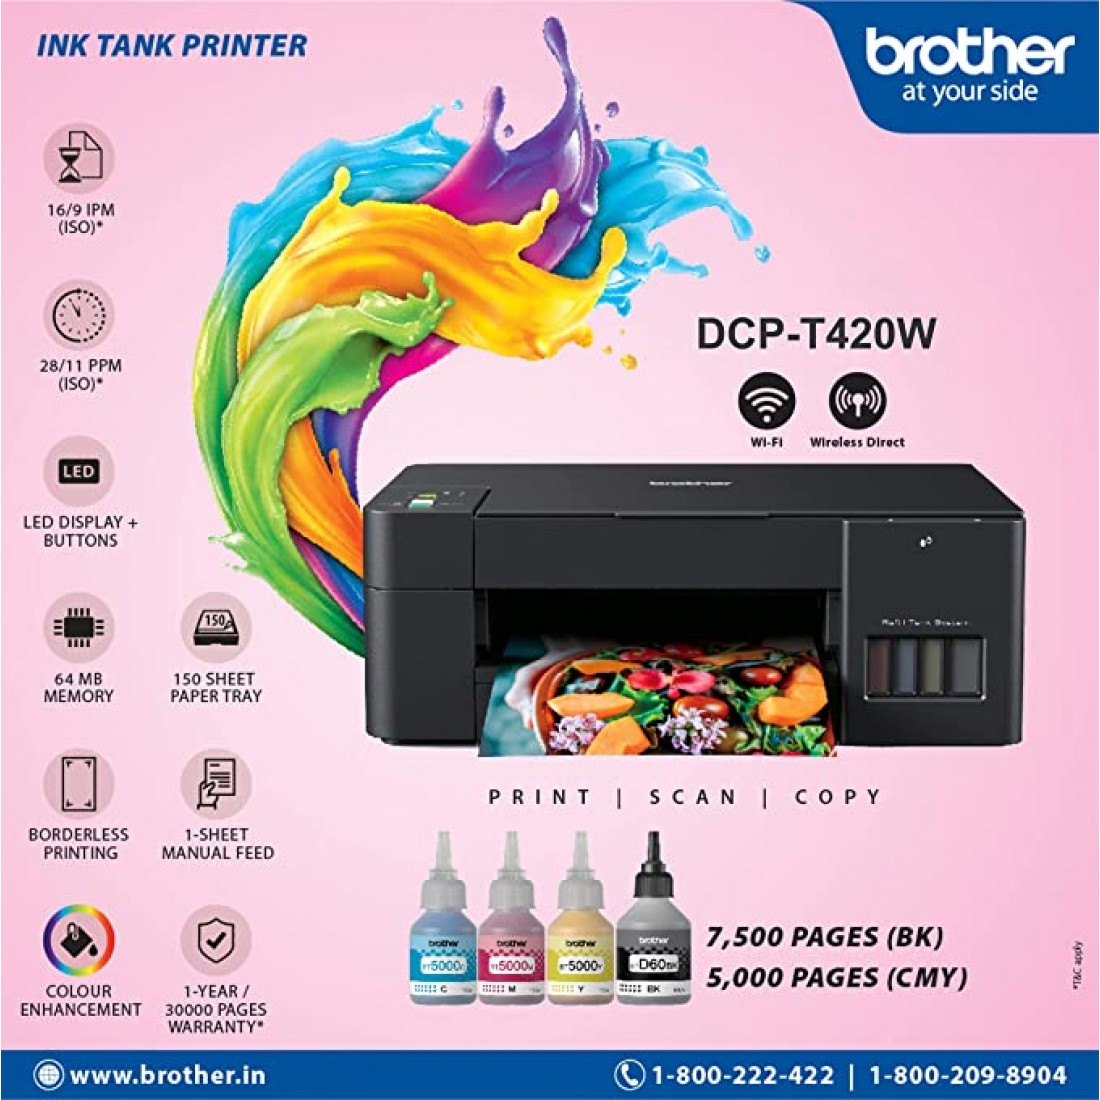 Brother Dcp T420w All In One Ink Tank Refill System Printer With Built In Wireless Technology 9260